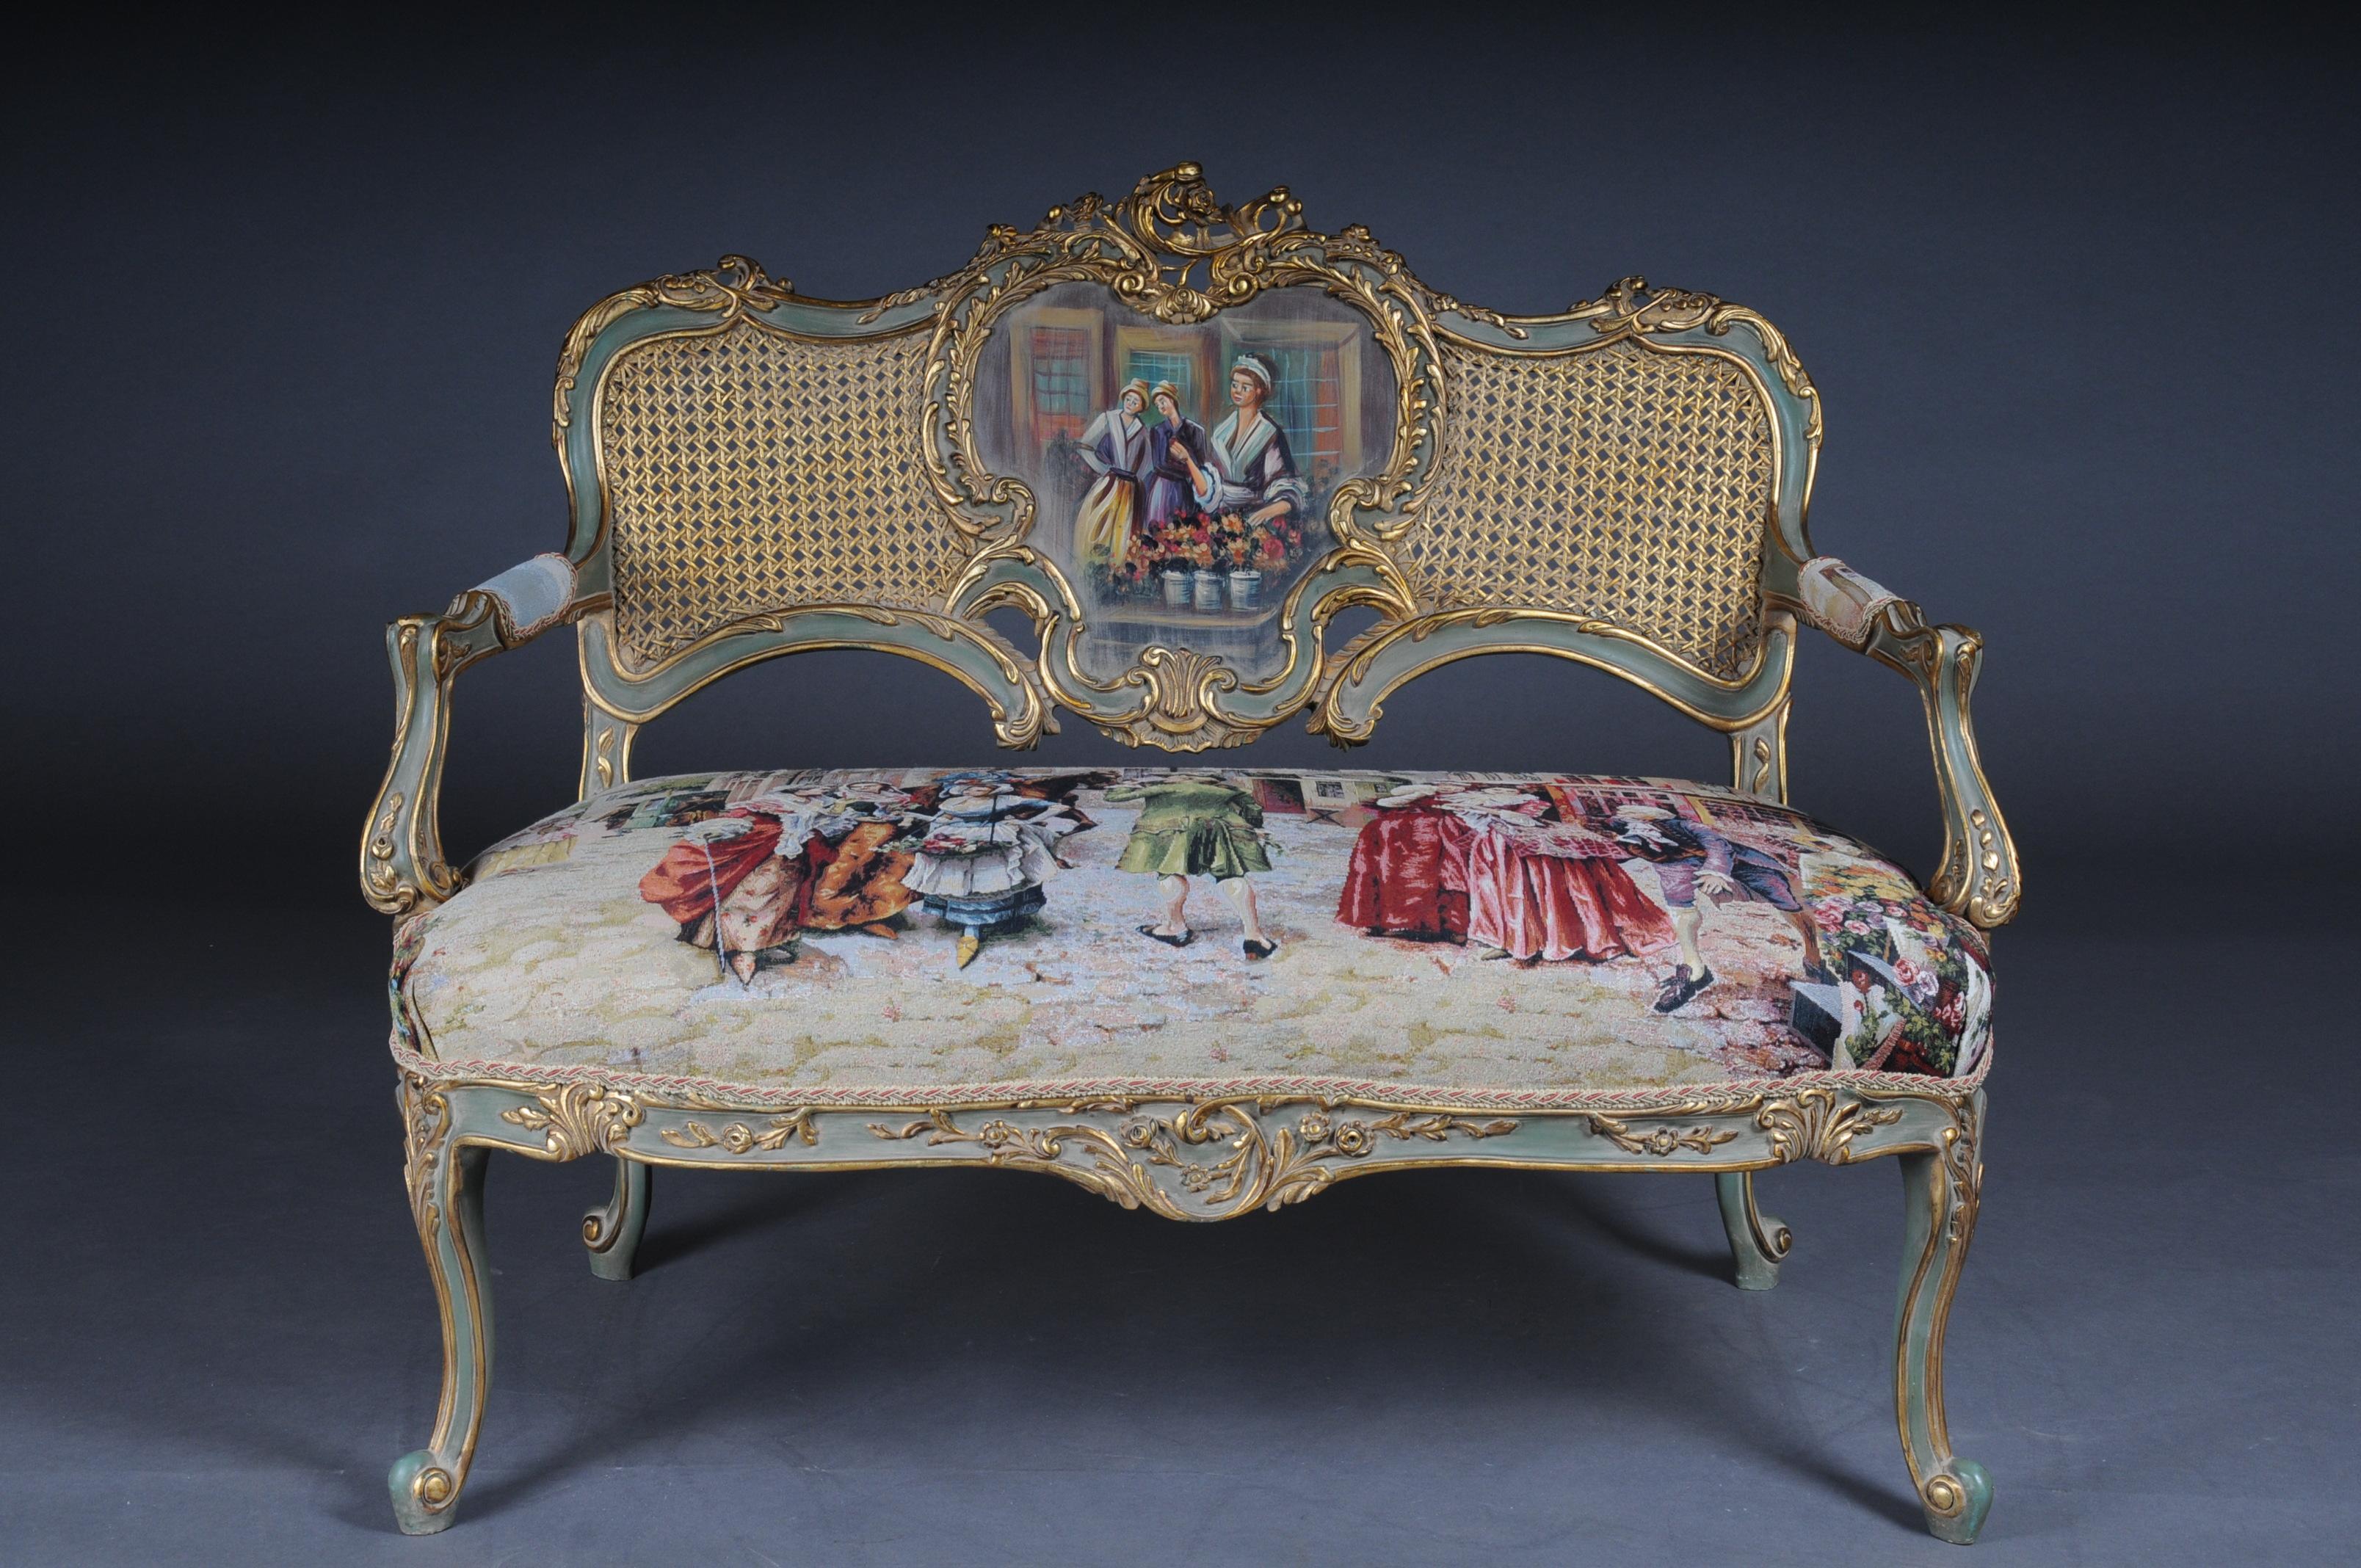 20th Century Beautiful Sofa, Couch, Canapé in Rococo or Louis XV Style In Good Condition For Sale In Berlin, DE